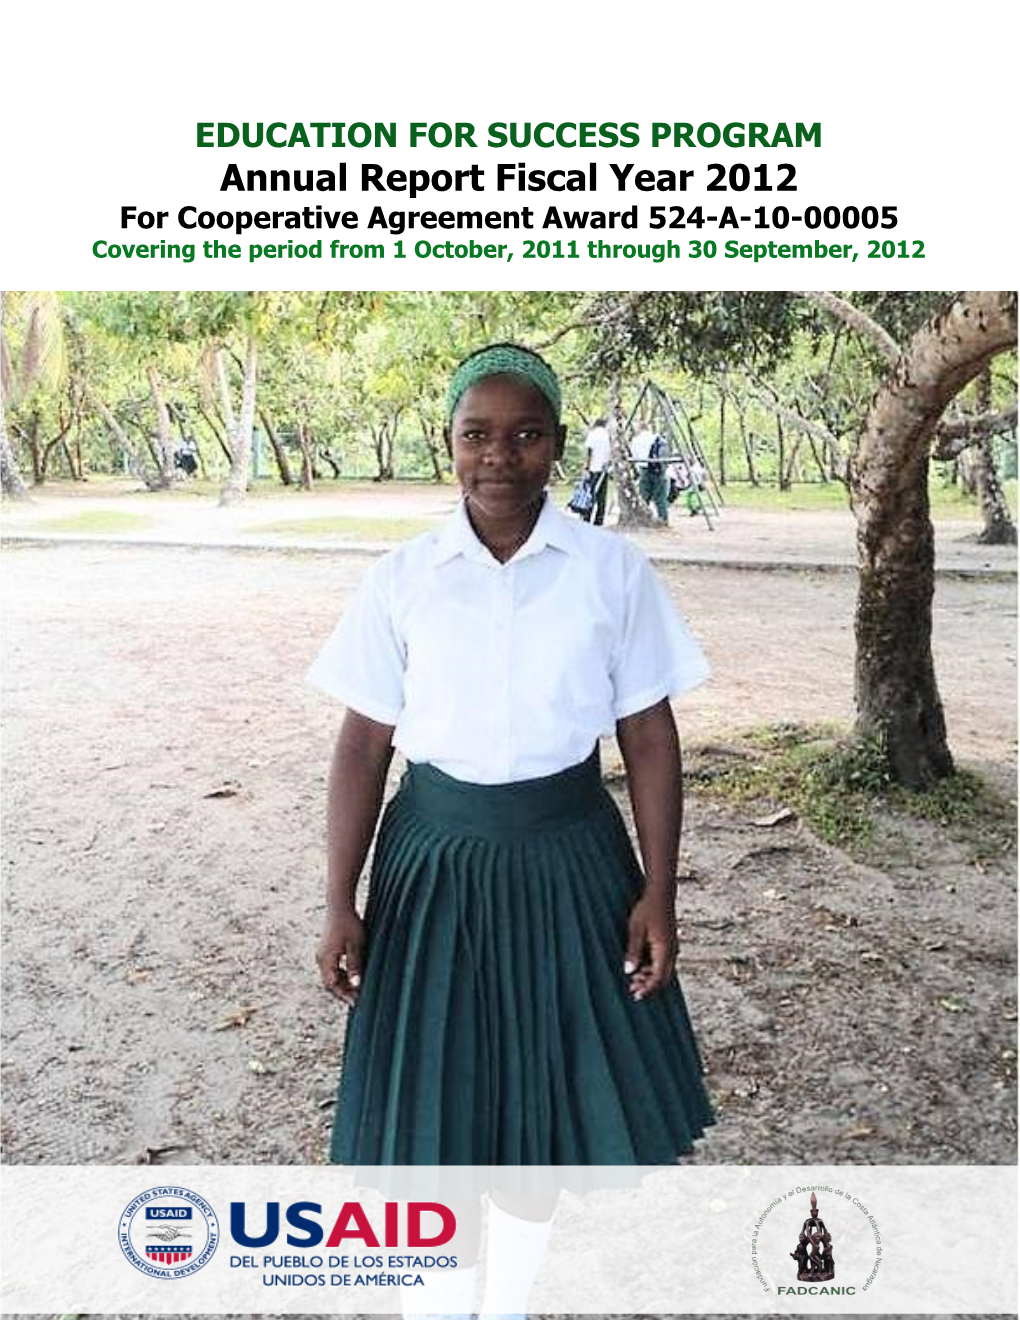 Annual Report Fiscal Year 2012 for Cooperative Agreement Award 524-A-10-00005 Covering the Period from 1 October, 2011 Through 30 September, 2012